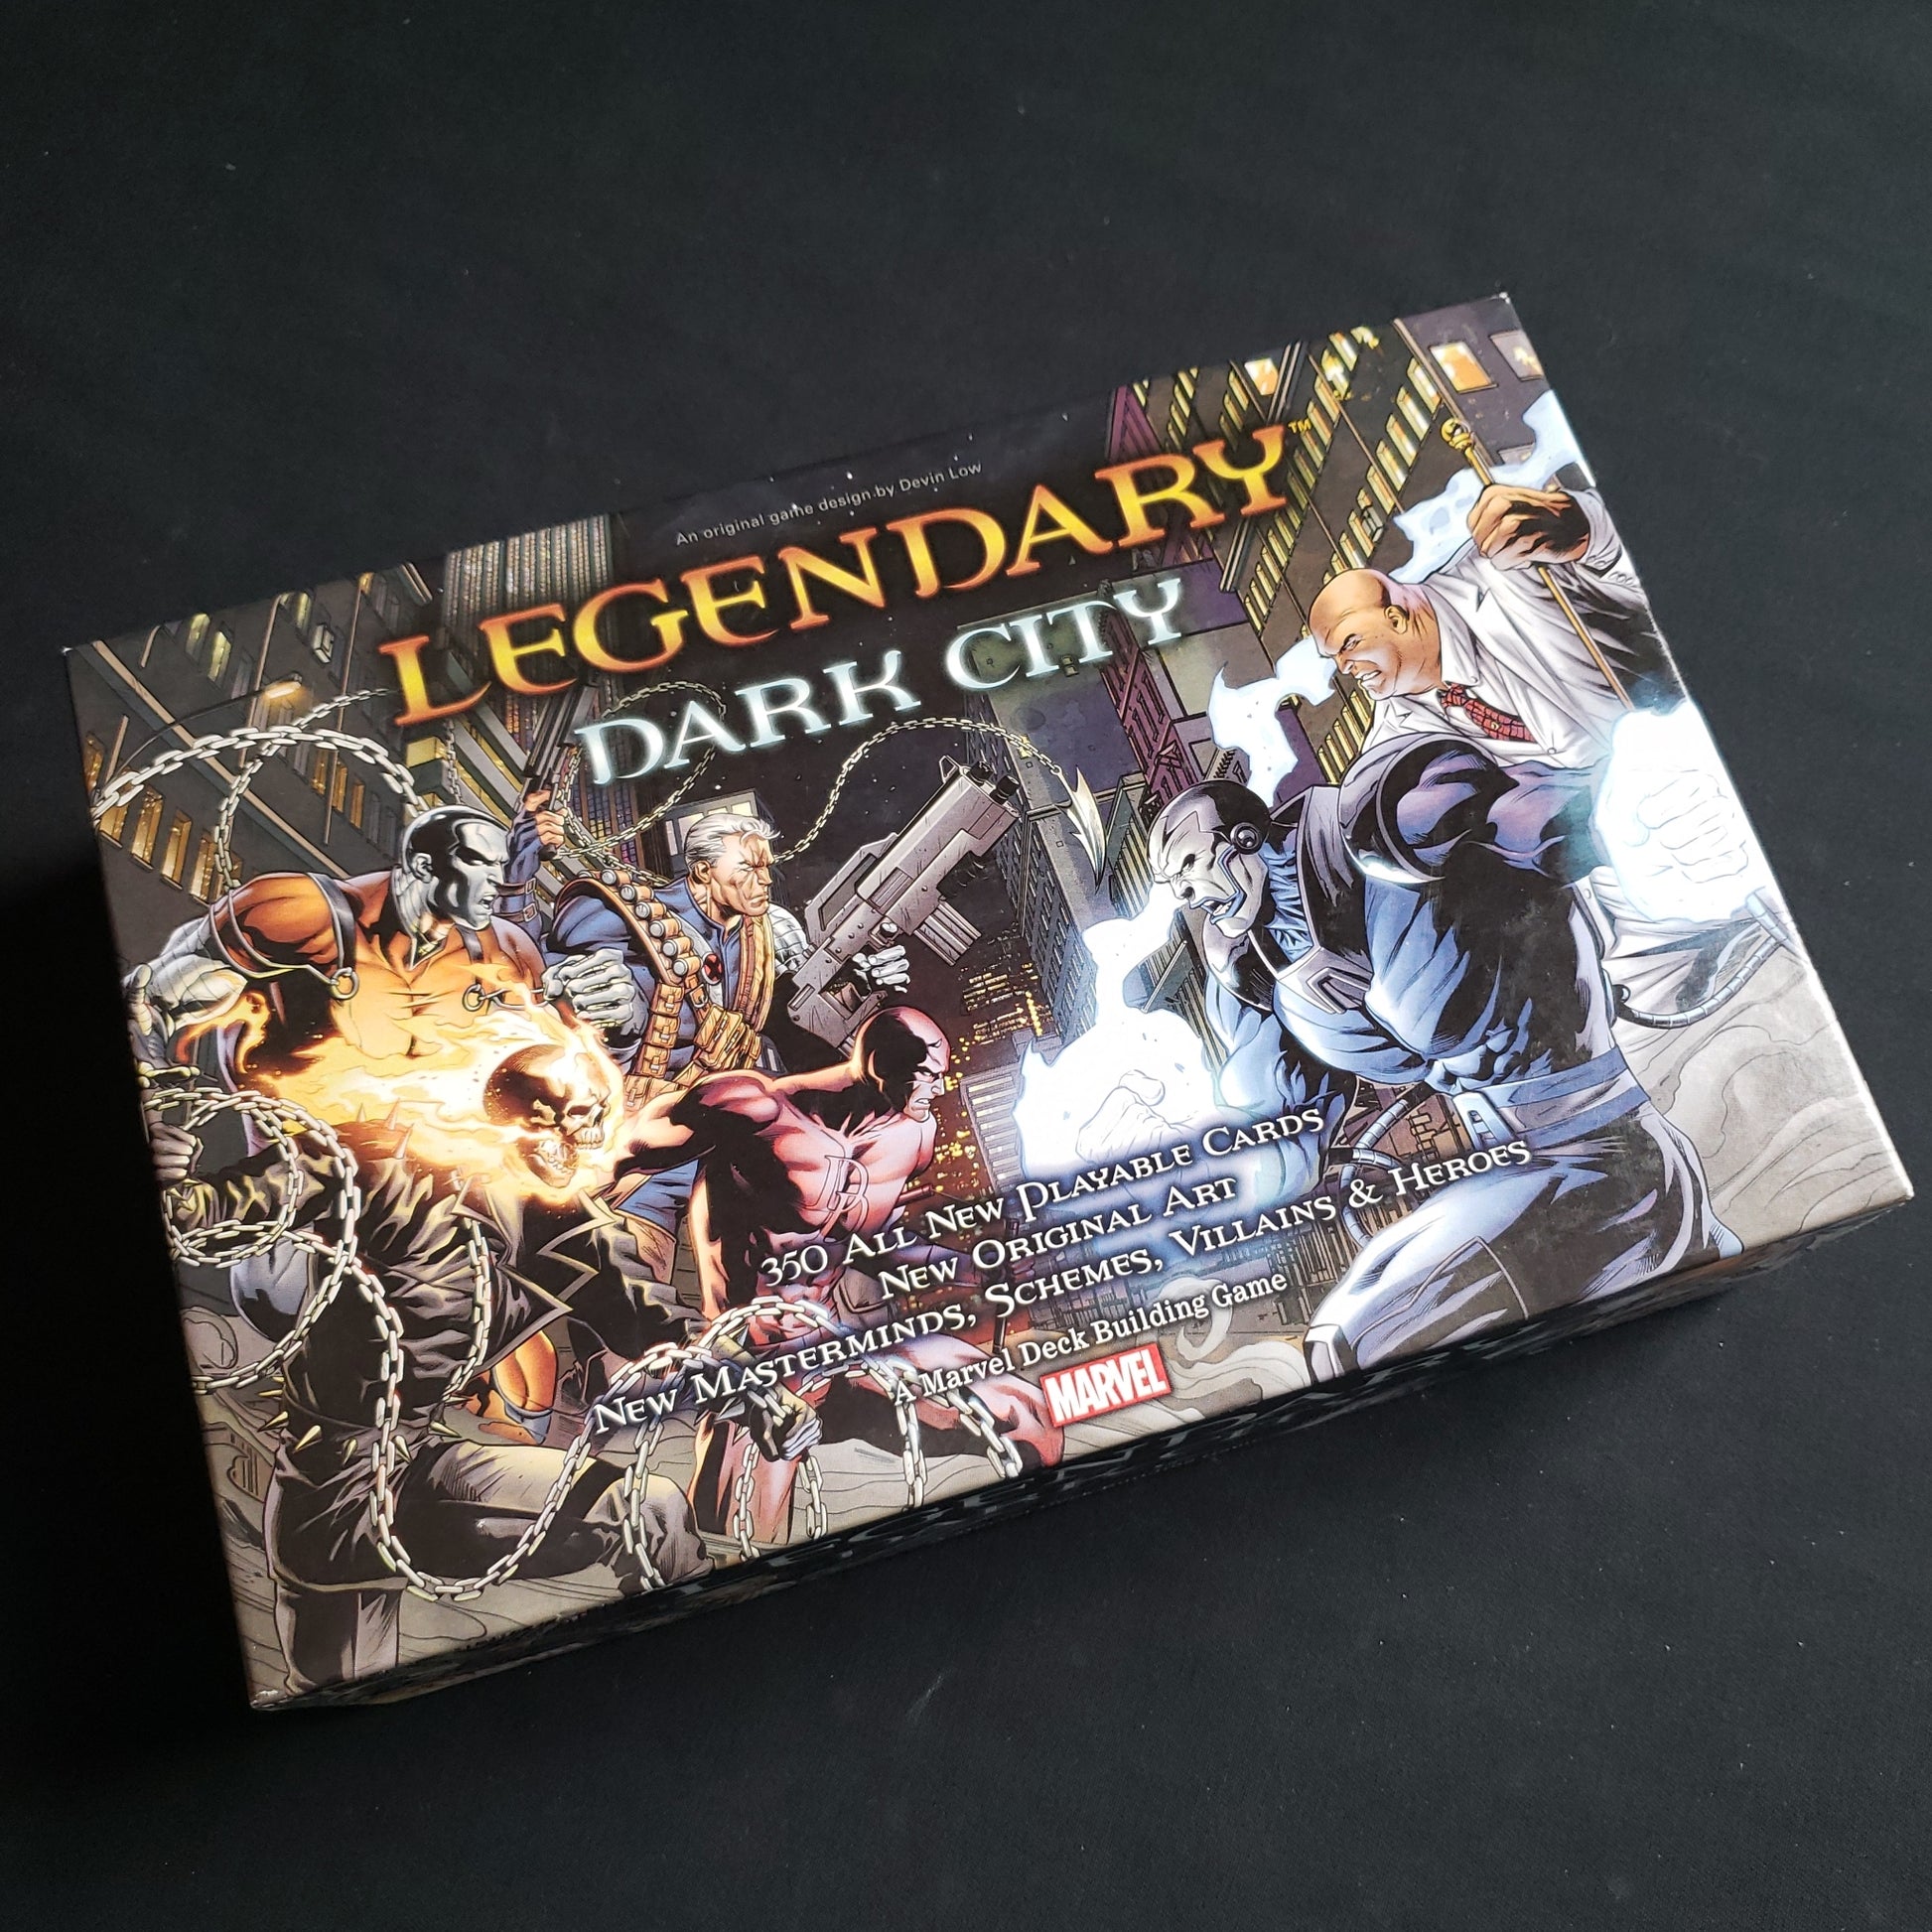 Image shows the front of the box for the Dark City Expansion for the Legendary Marvel card game